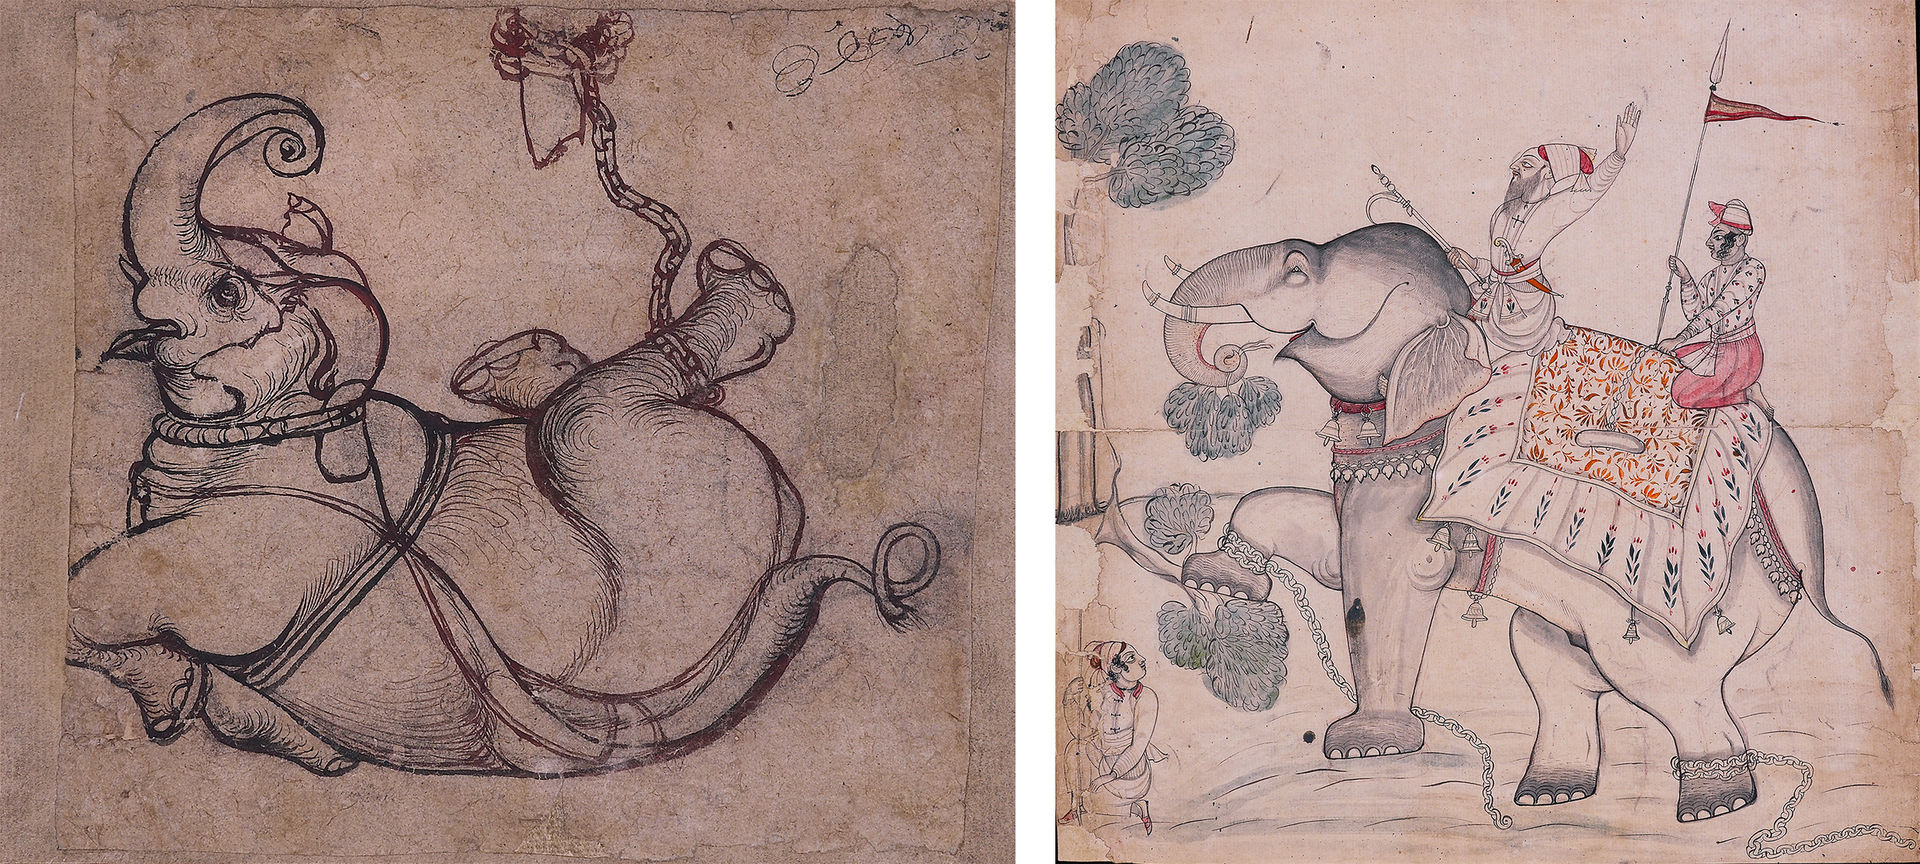 drawing of an elephant rolling in the dust on the left and drawing of an elephant with a rider on the right